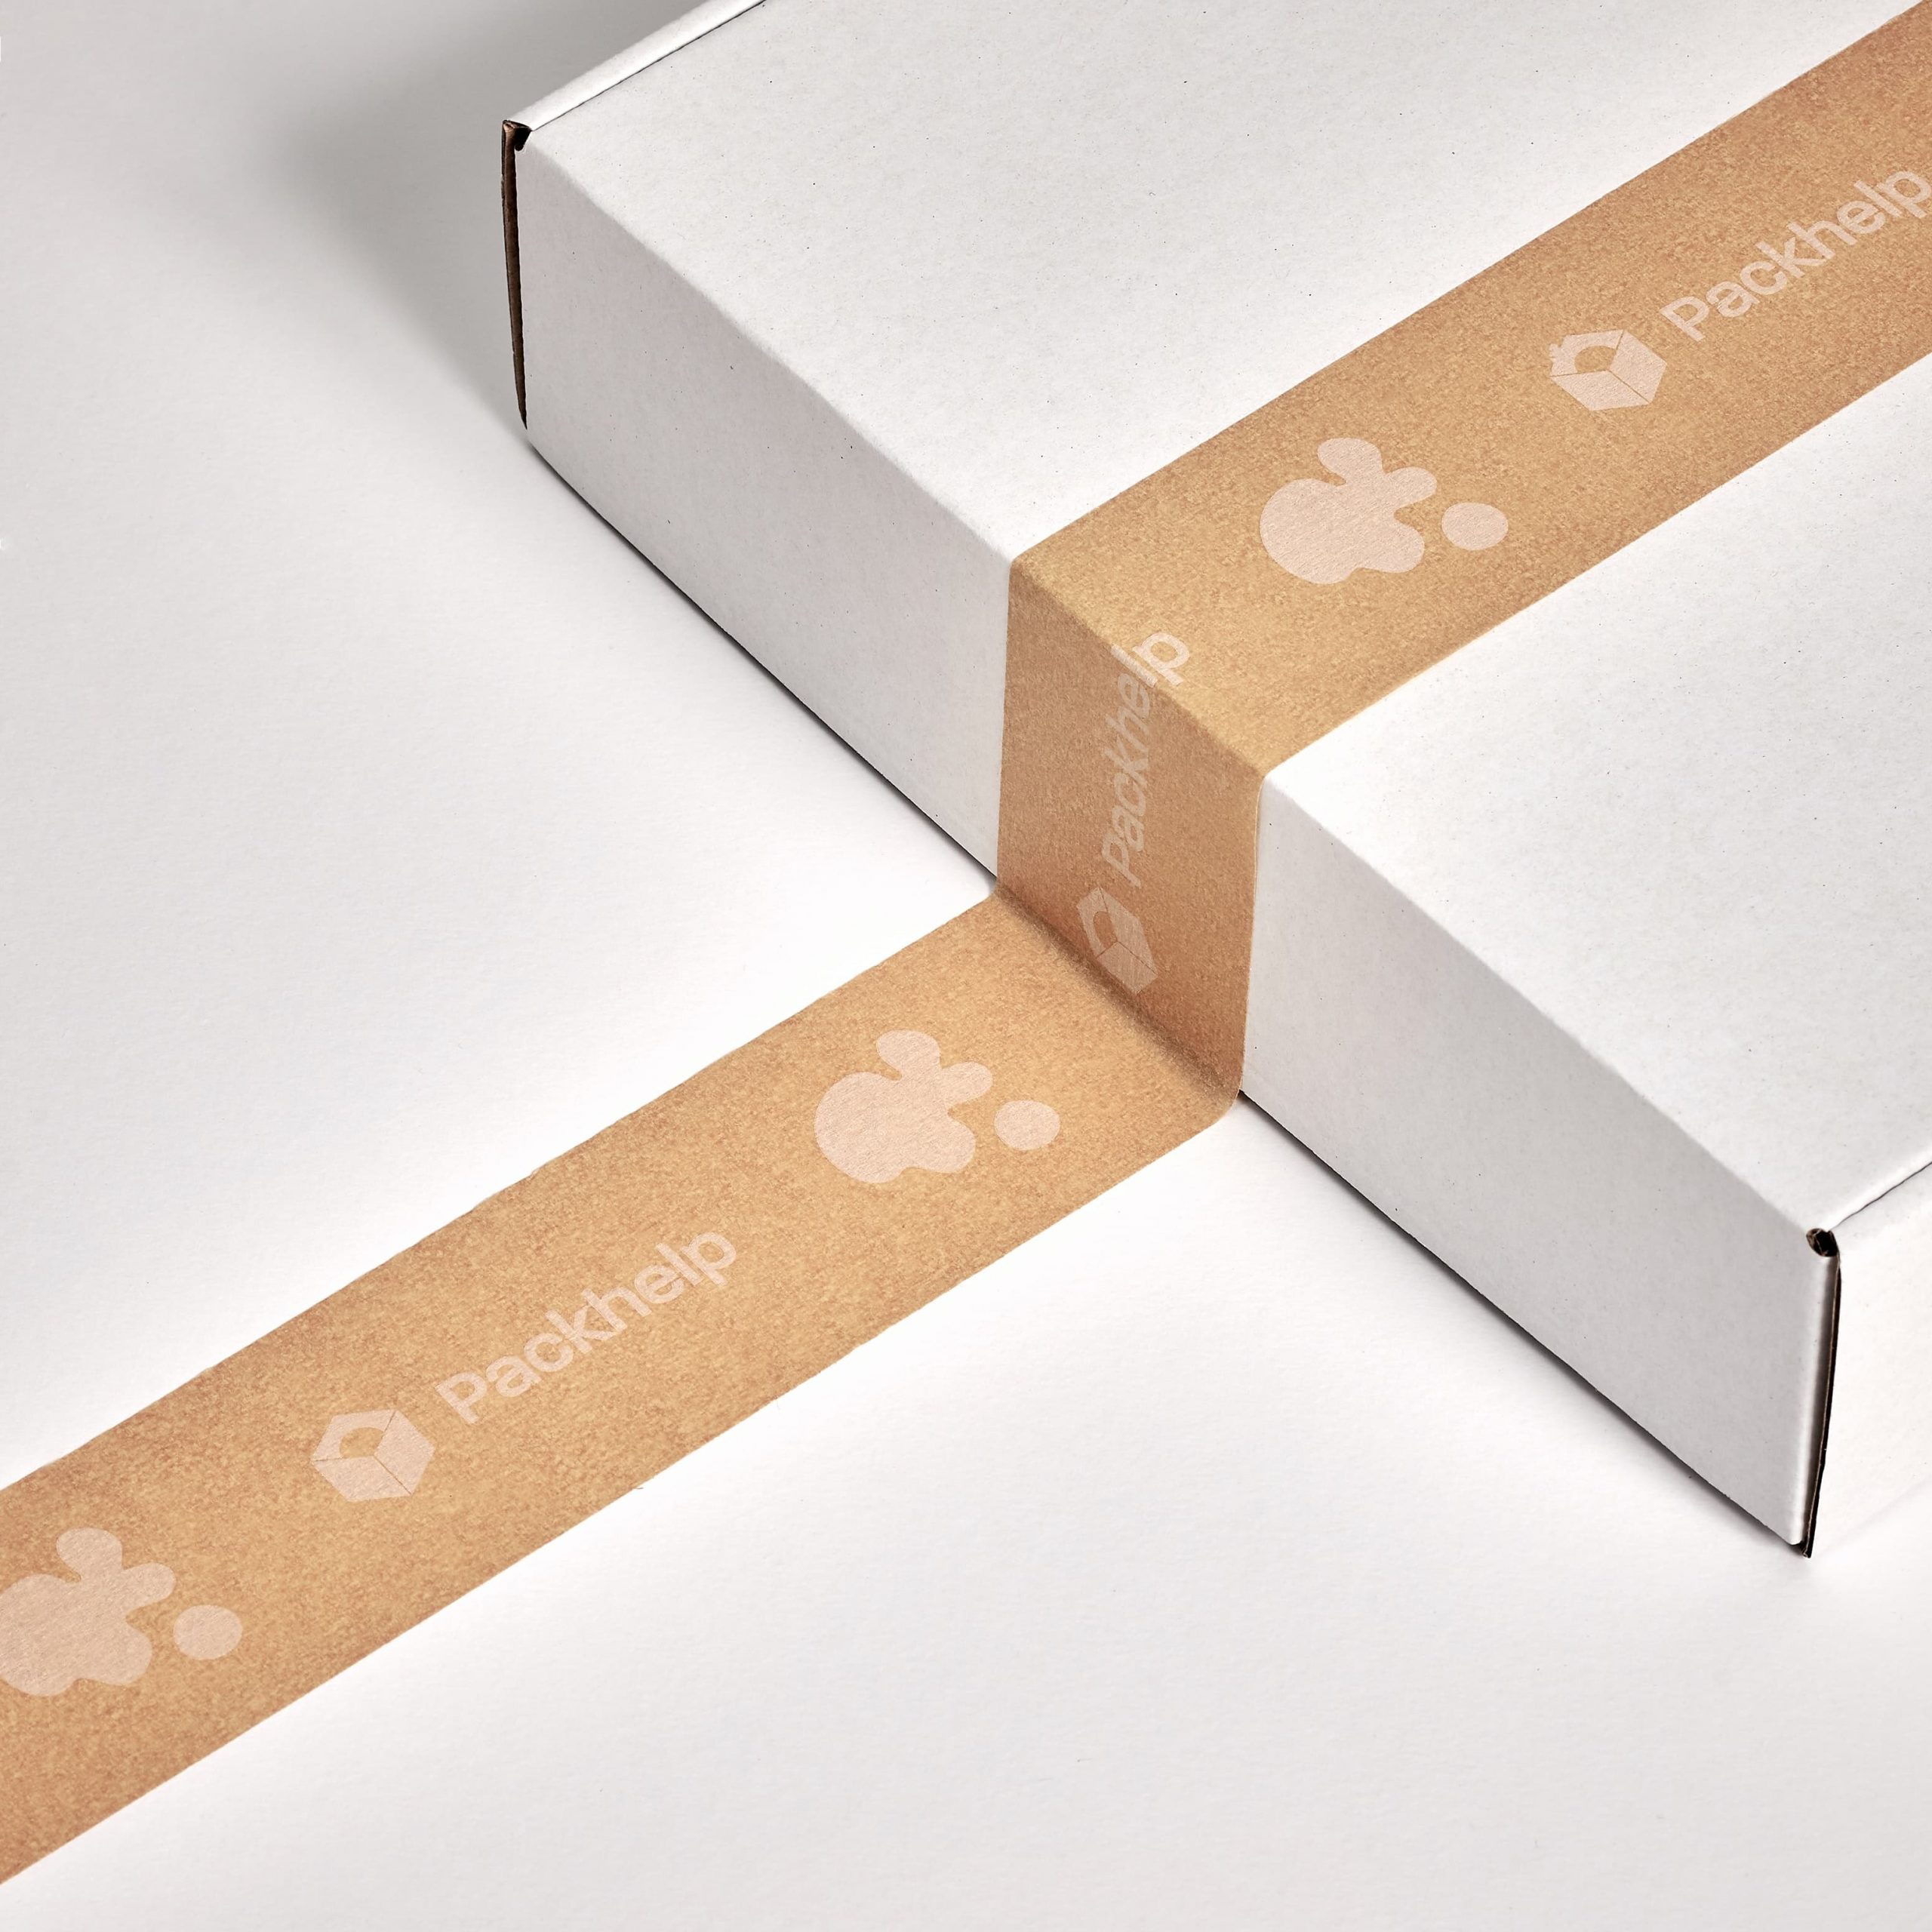 How does smart packaging help protect the authenticity of products?